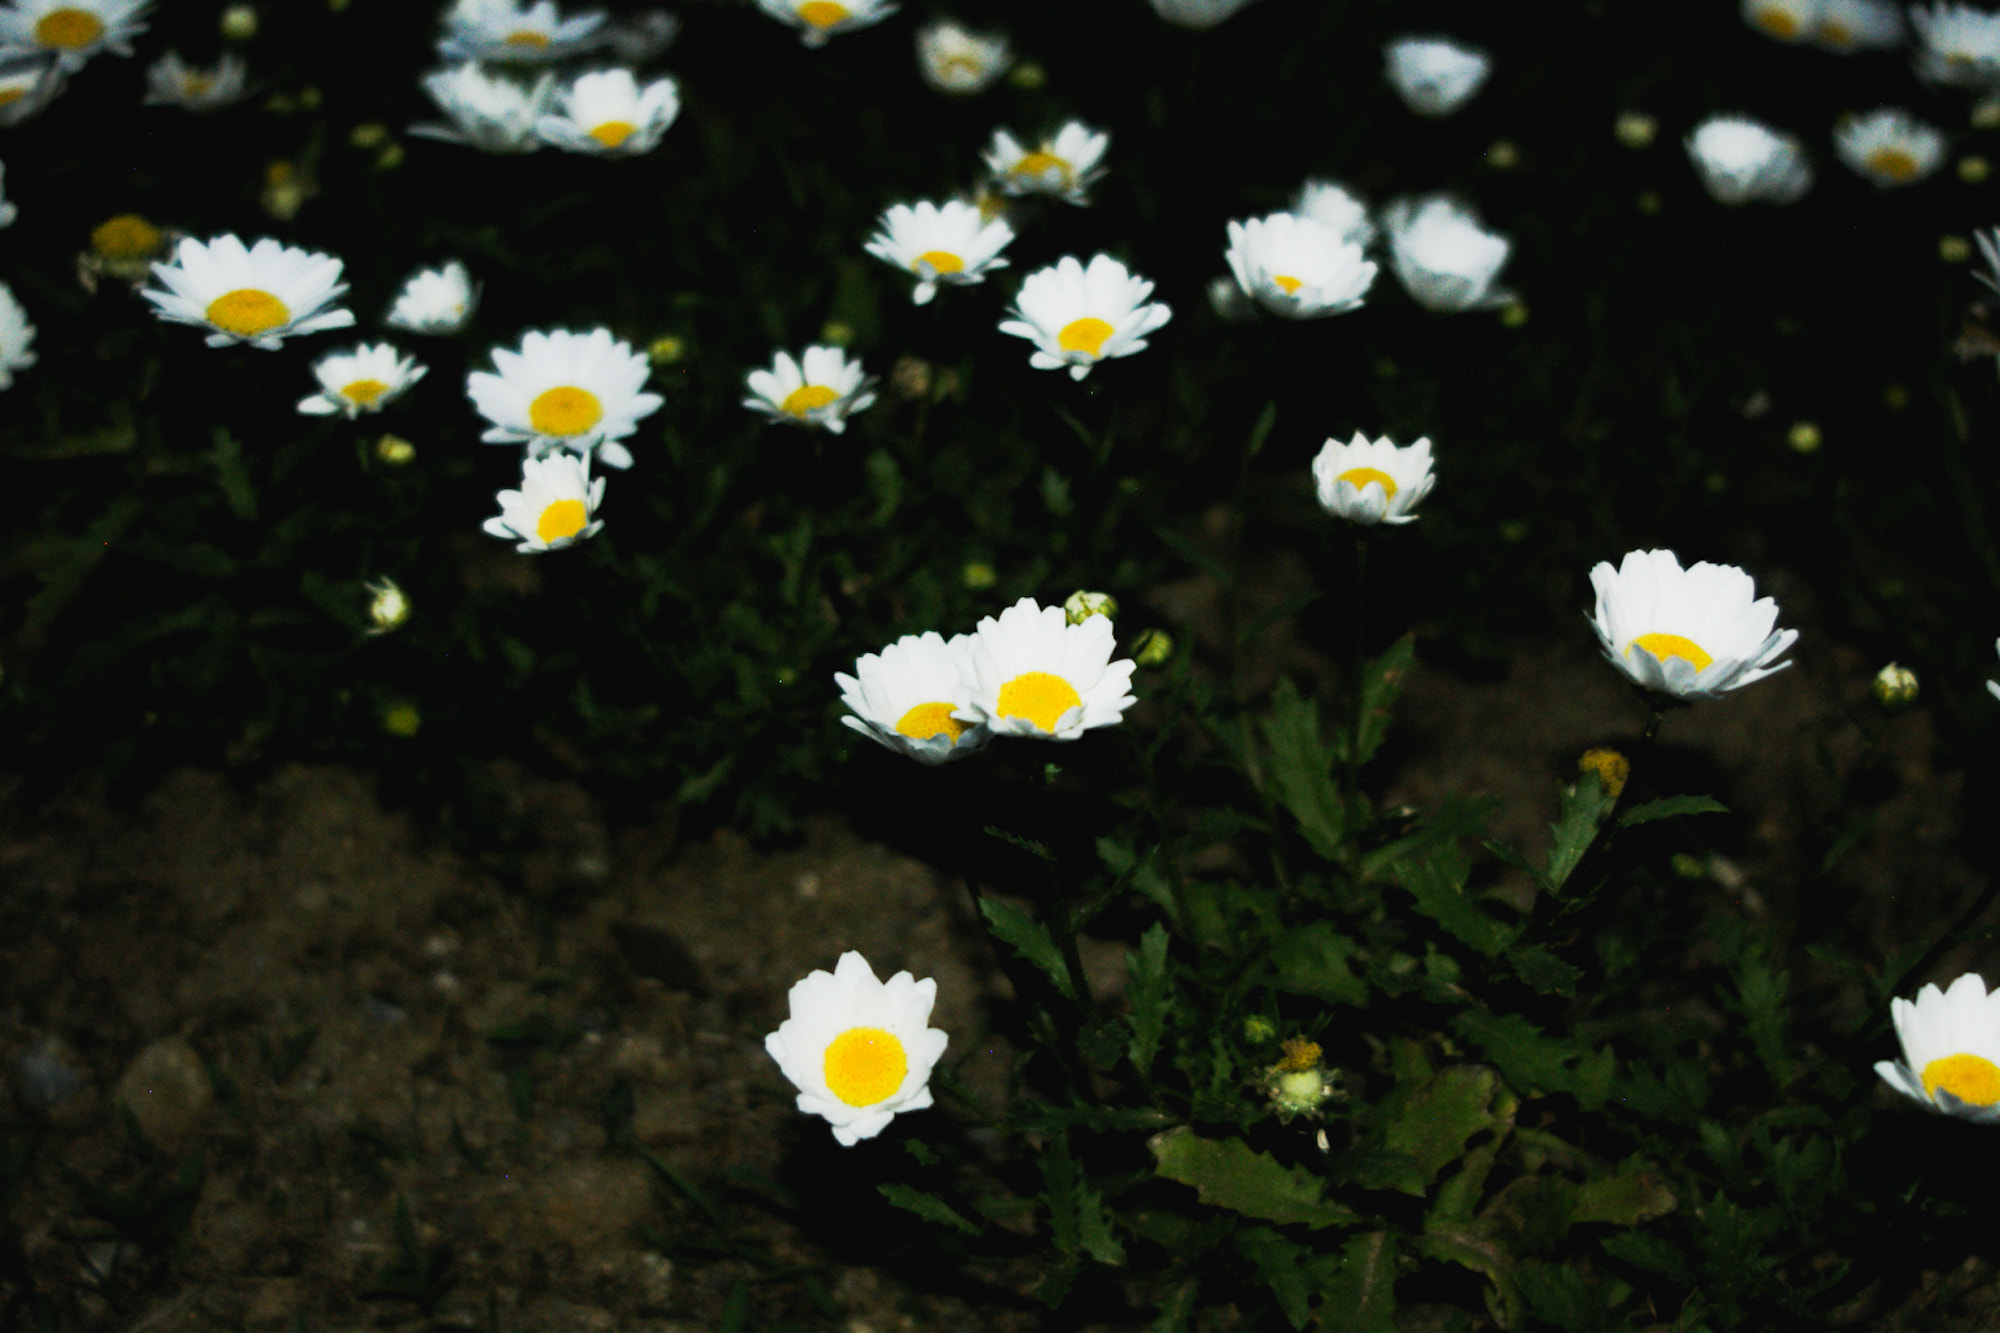 Pentax *ist D sample photo. Flowers at night x photography